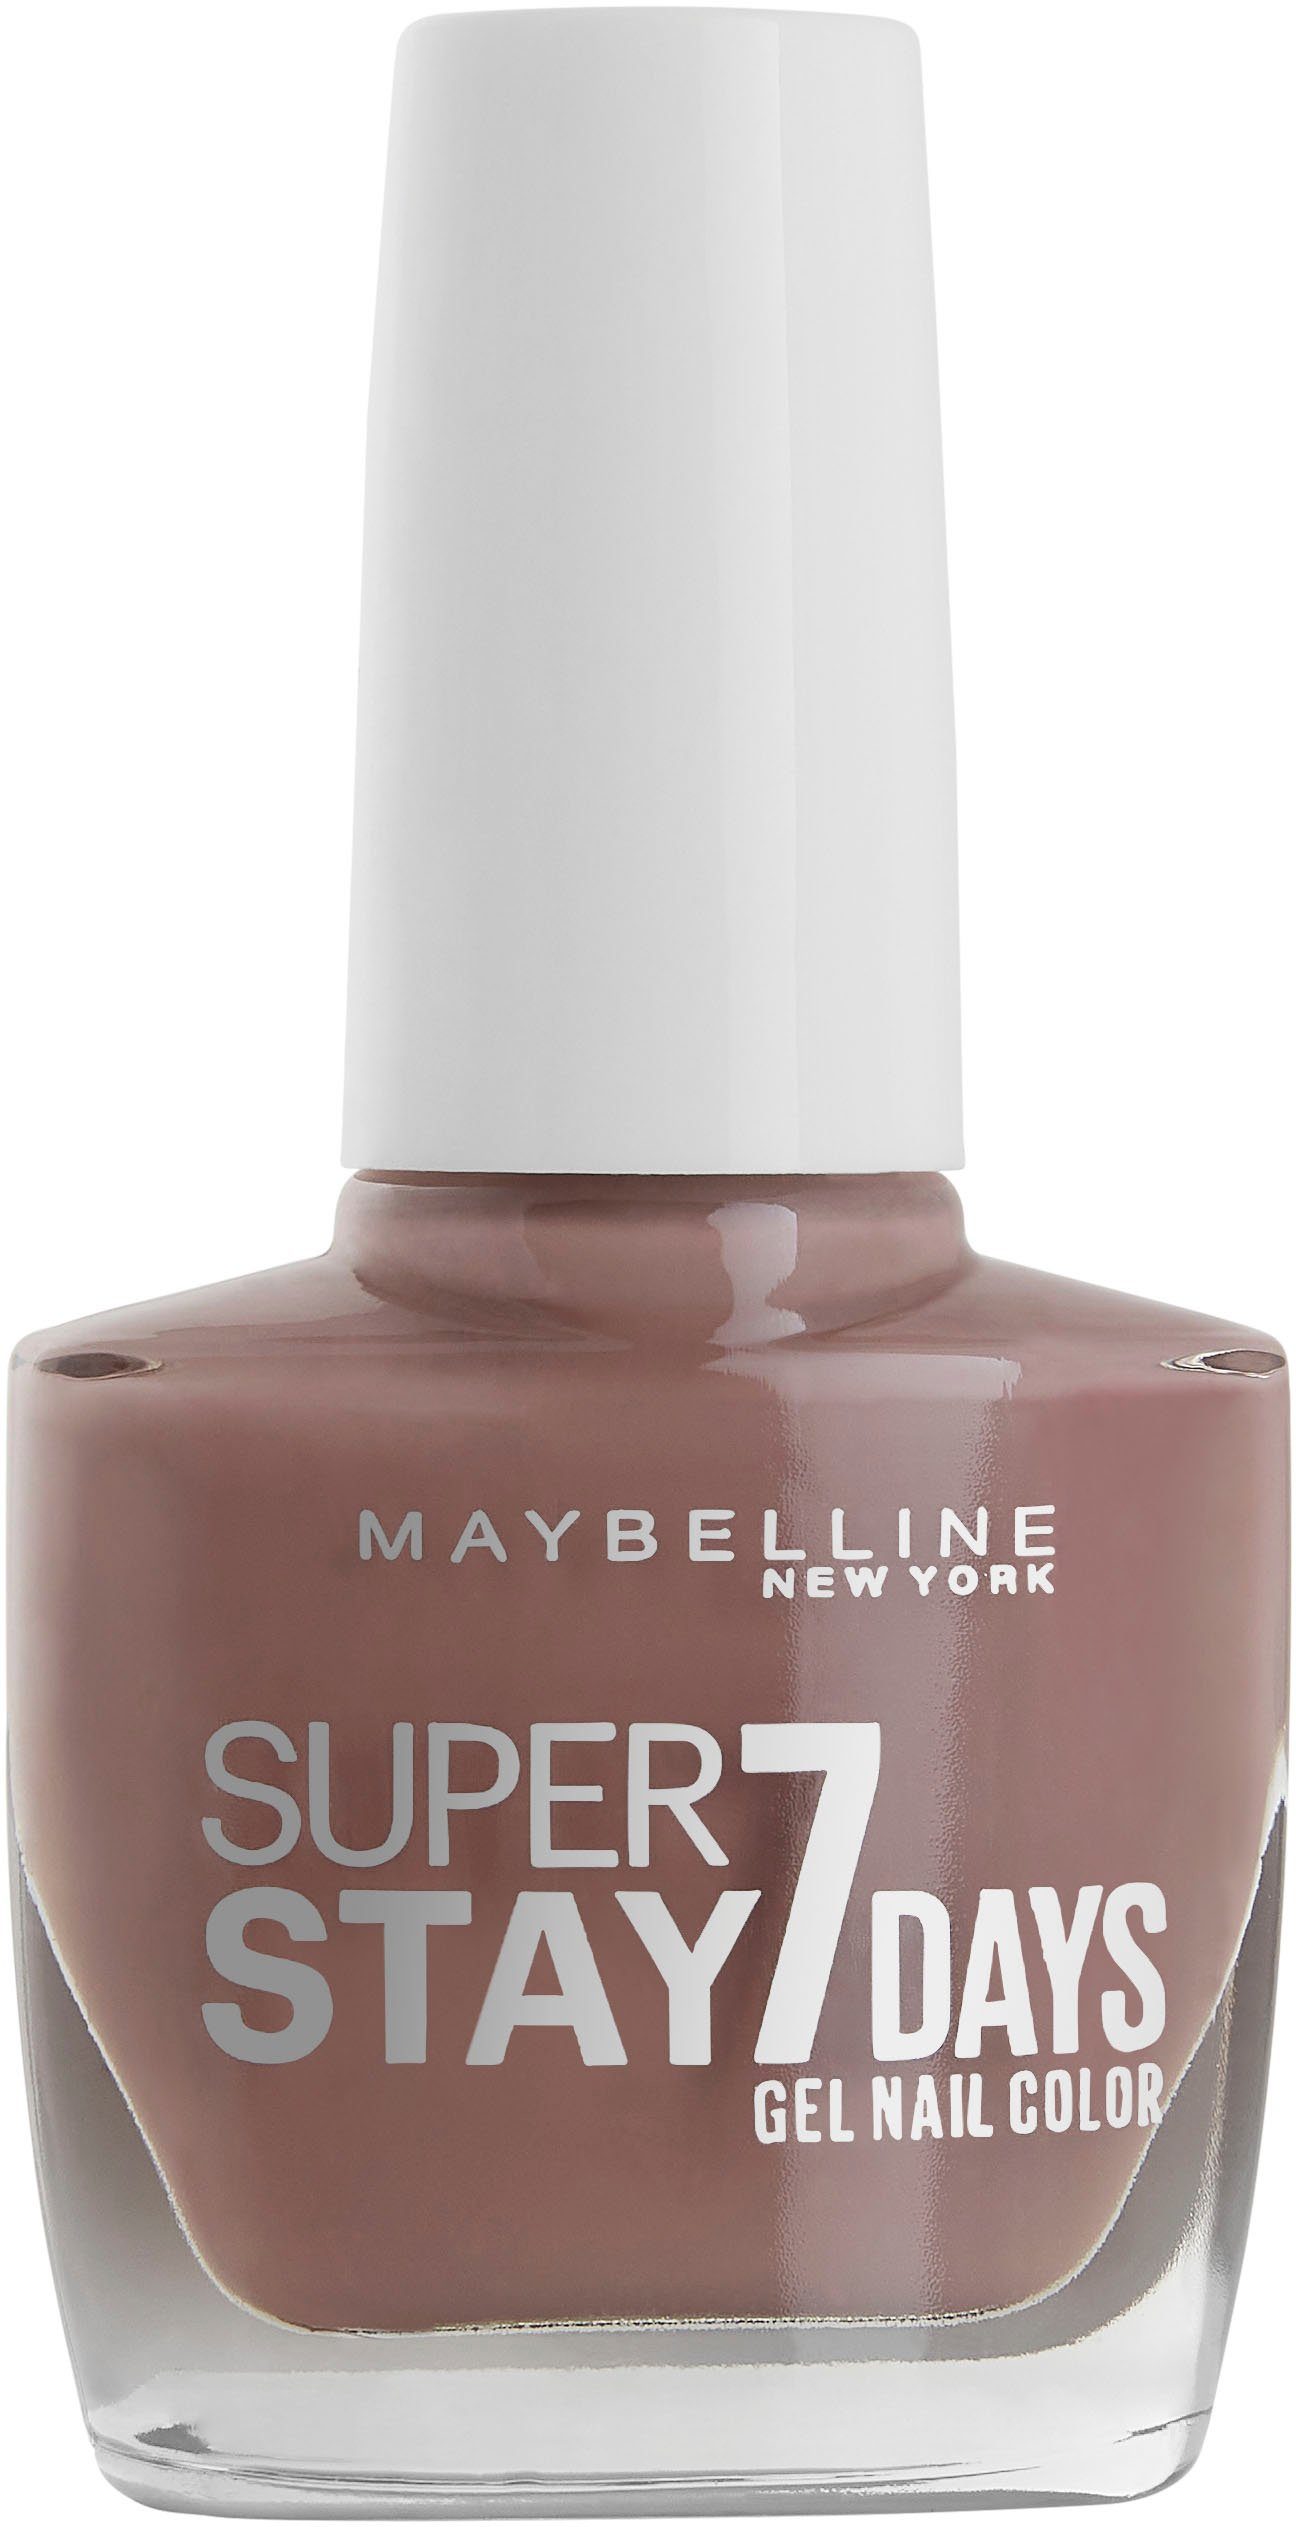 YORK Nagellack 7 Superstay Bare Nr. NEW 930 All Days MAYBELLINE it